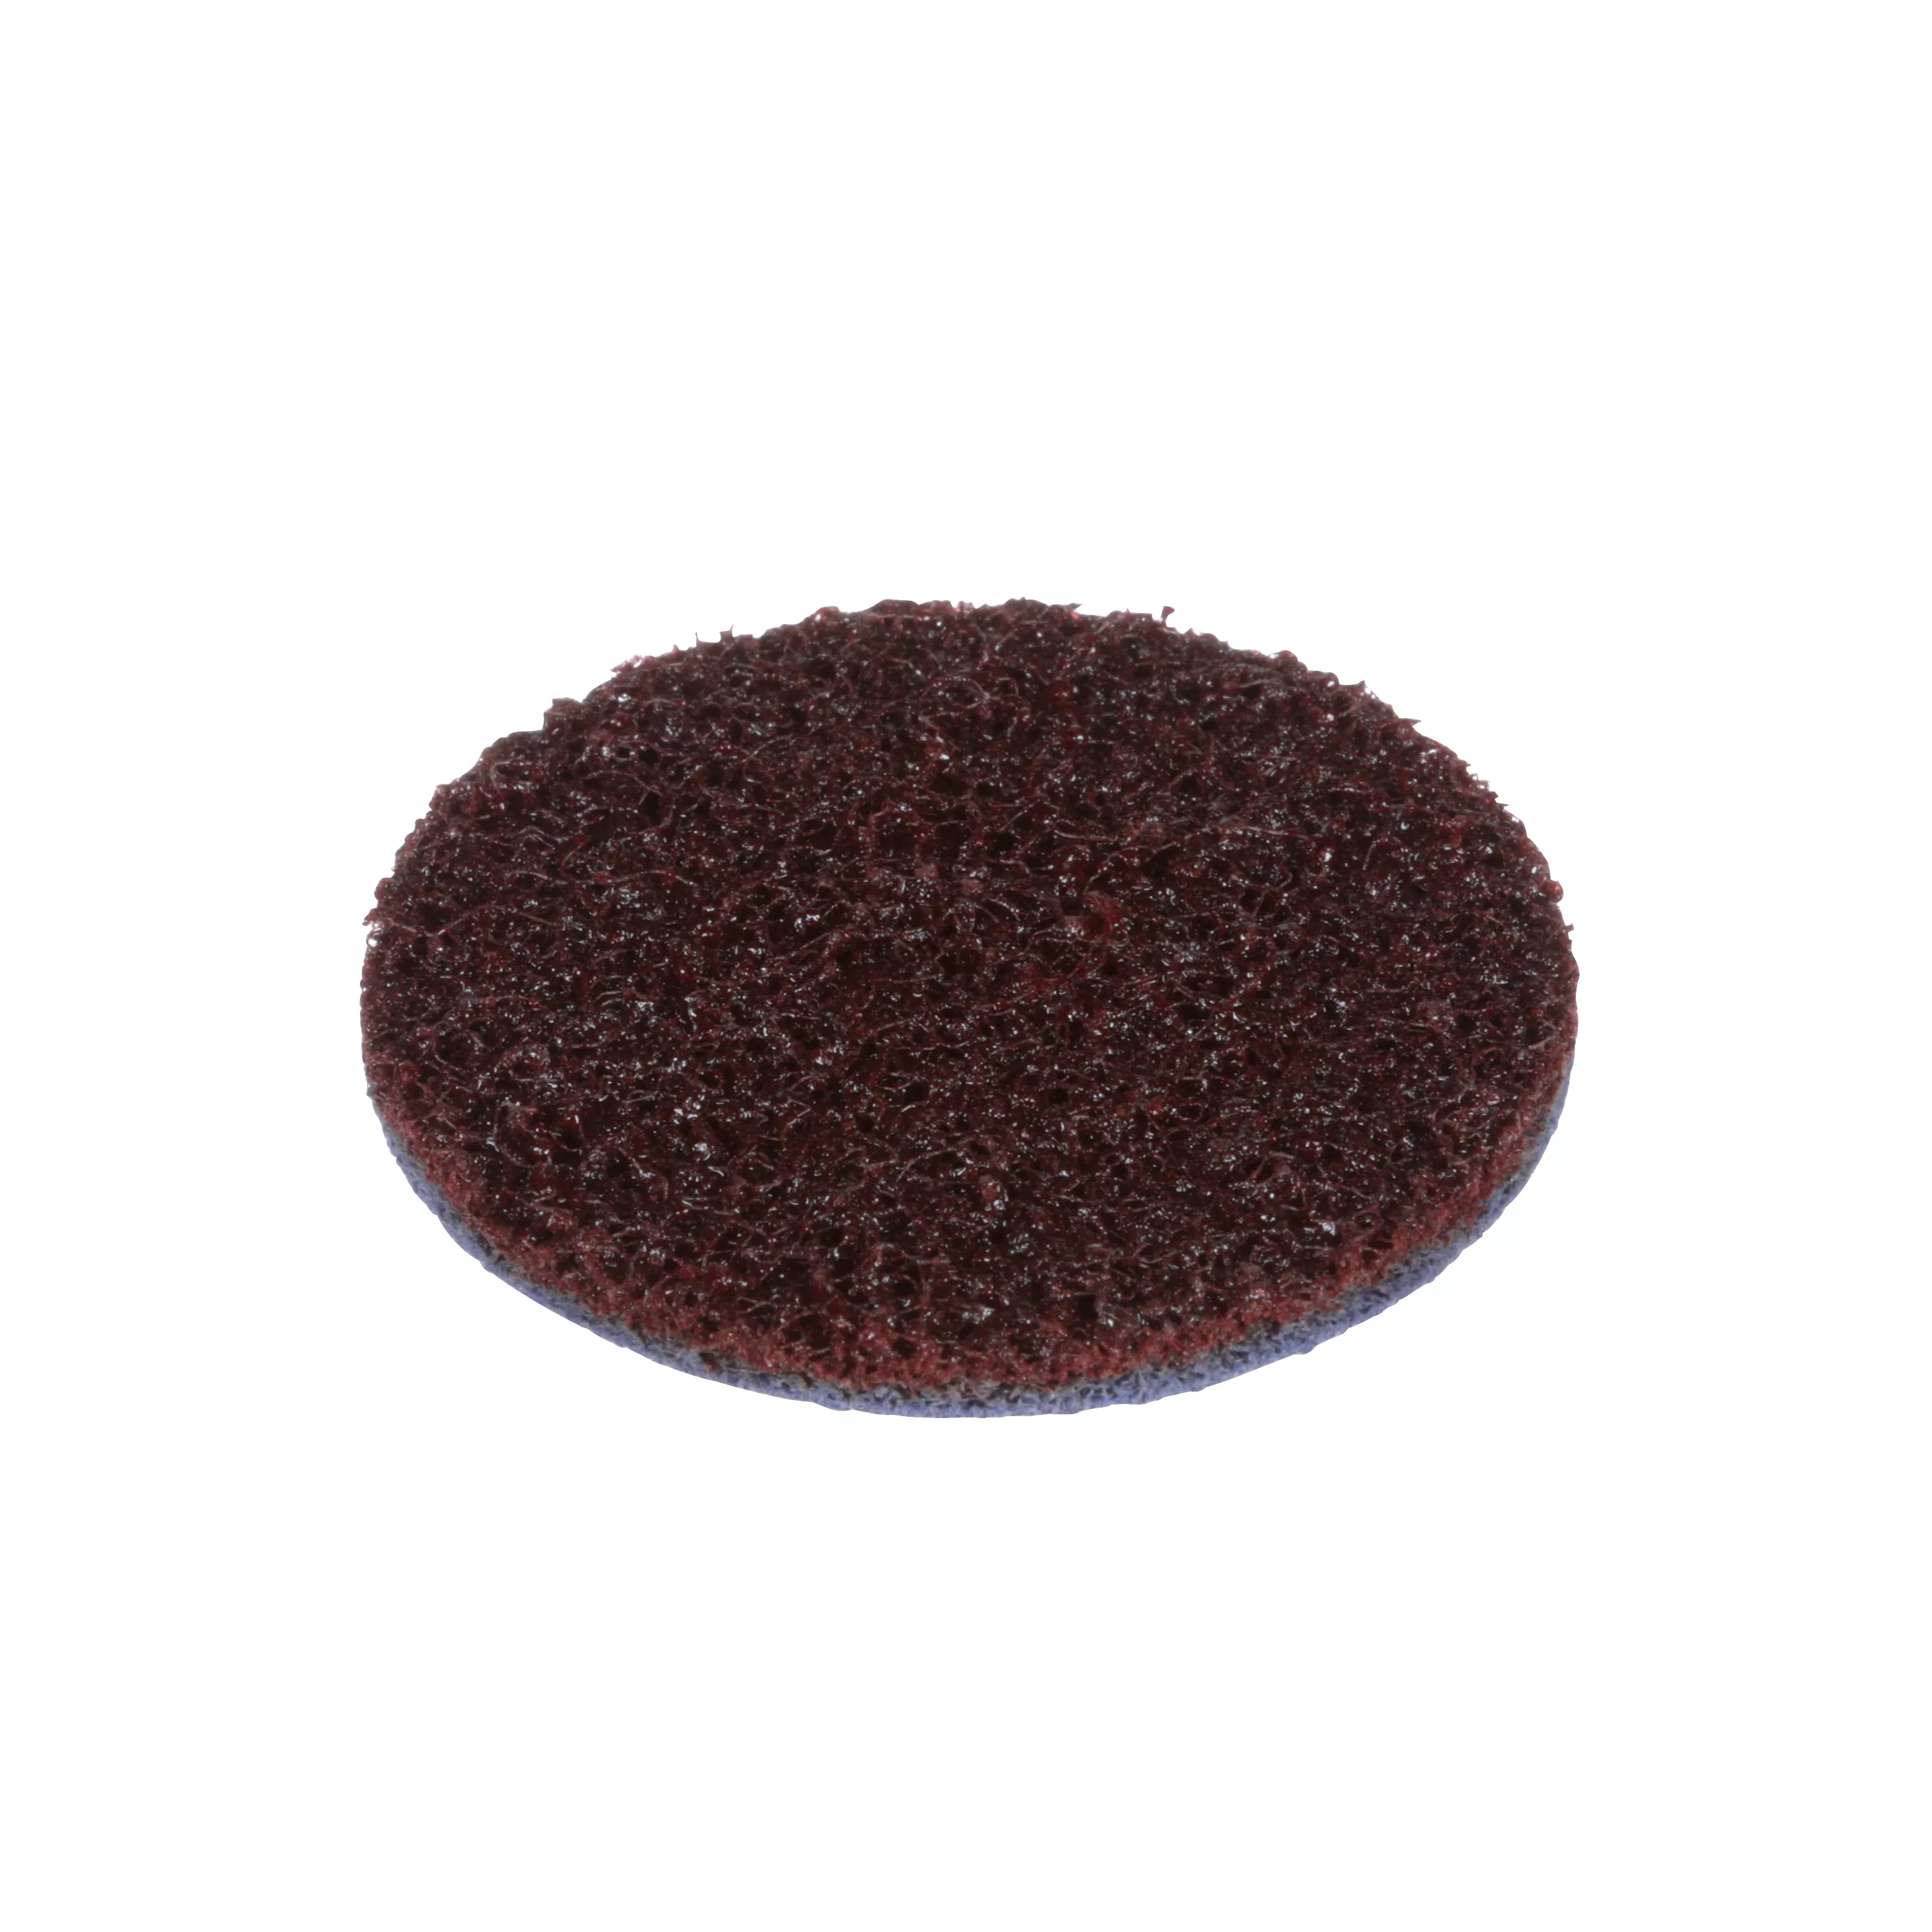 Standard Abrasives™ Quick Change Surface Conditioning XD Disc, 848382,
A/O MED, TR, Maroon, 2 in, Die Q200P, 50/Car, 200 ea/Case